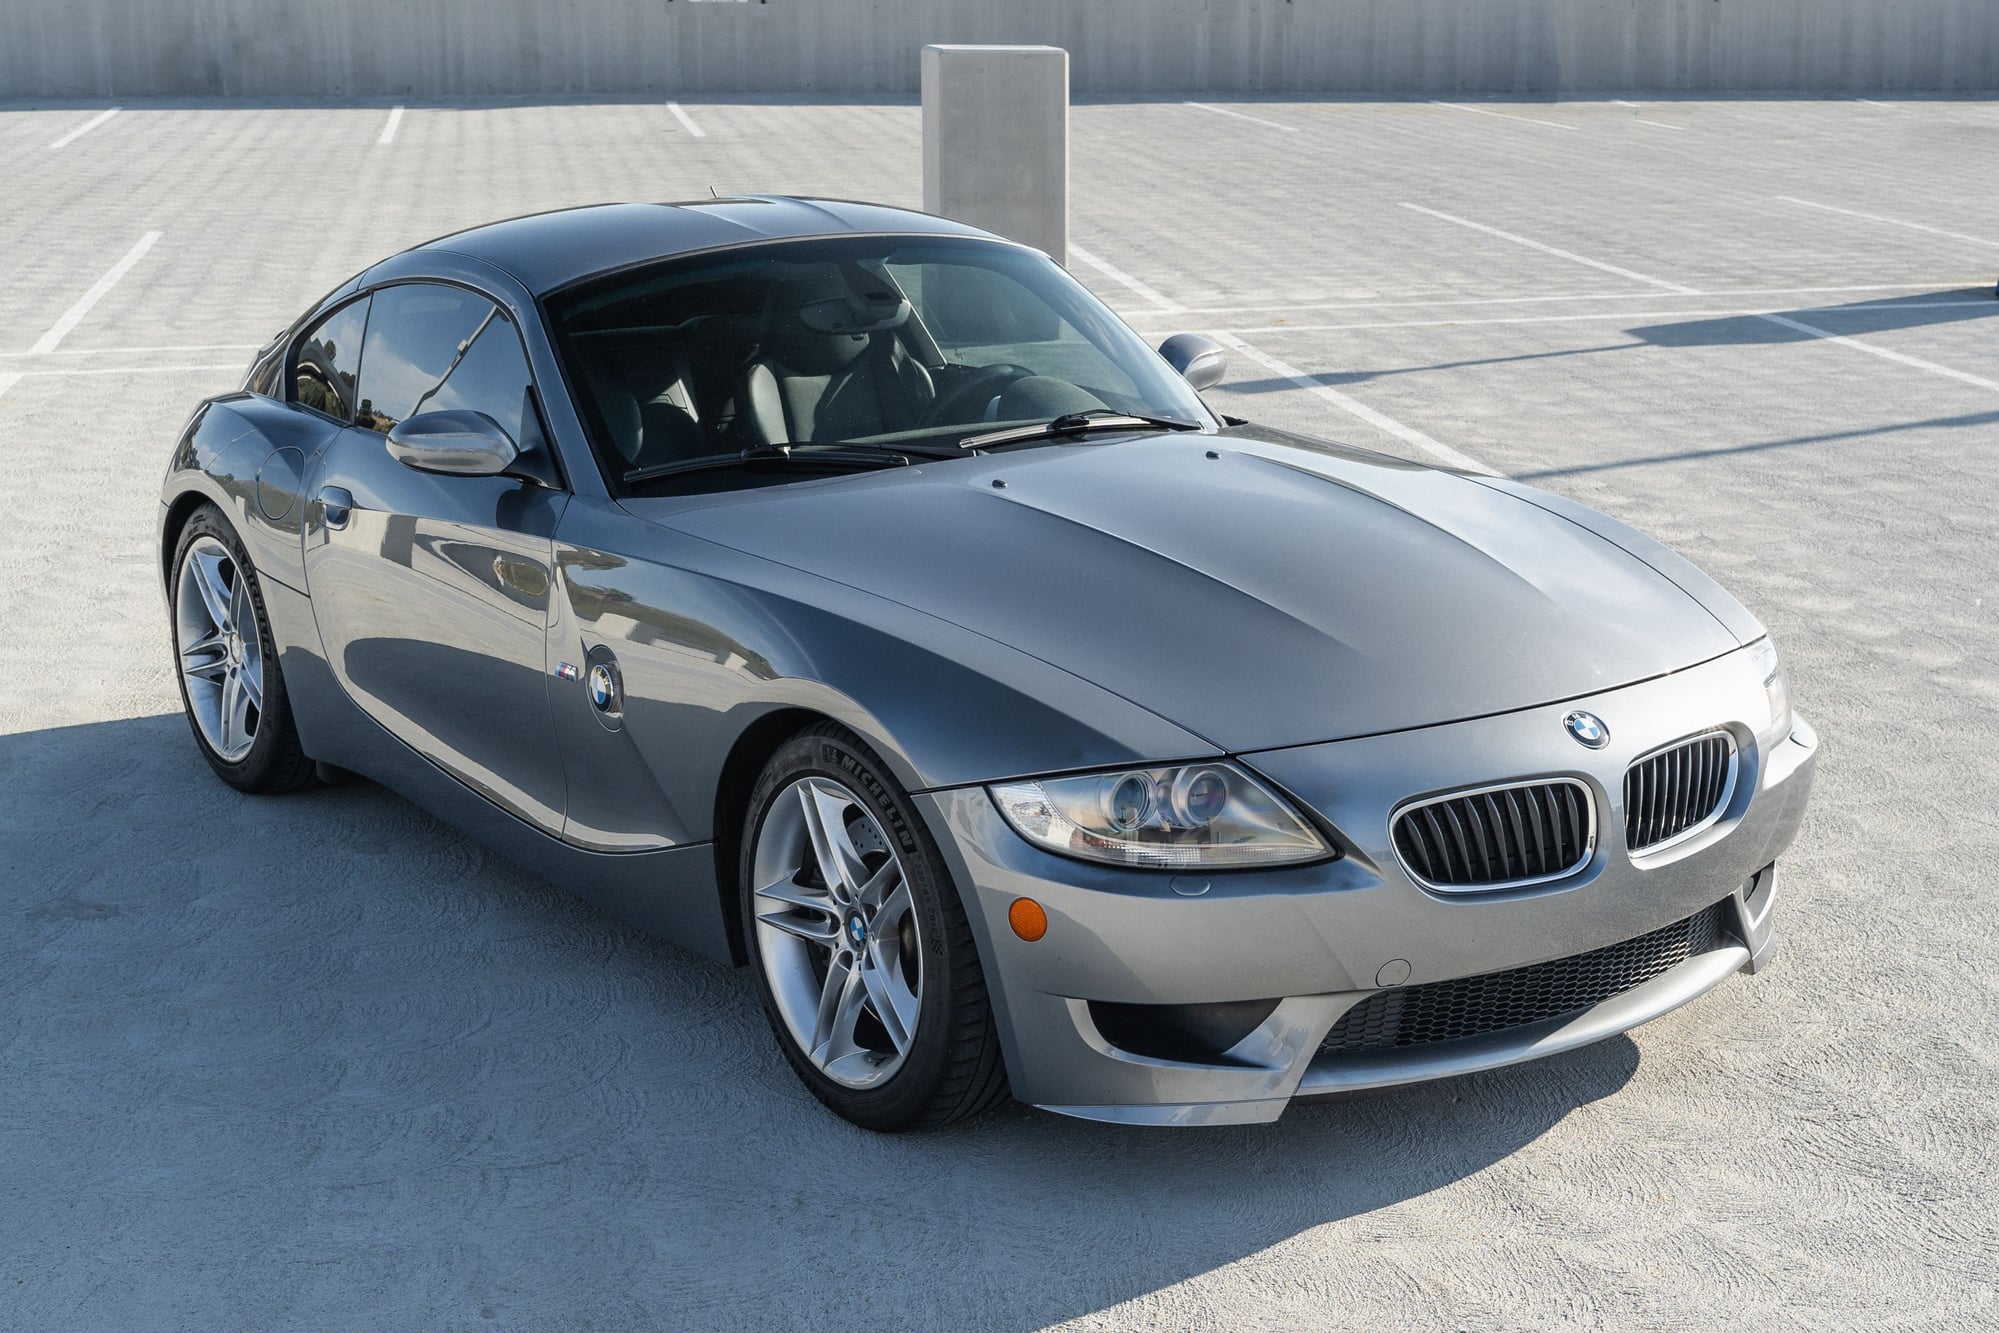 2008 BMW Z4 - Low Mile, Unicorn Spec 2008 Z4M Coupe [6MT, 48k Miles] - Used - VIN 5UMDU93578LM08602 - 48,300 Miles - 6 cyl - 2WD - Manual - Coupe - Gray - Riverside, CA 92507, United States